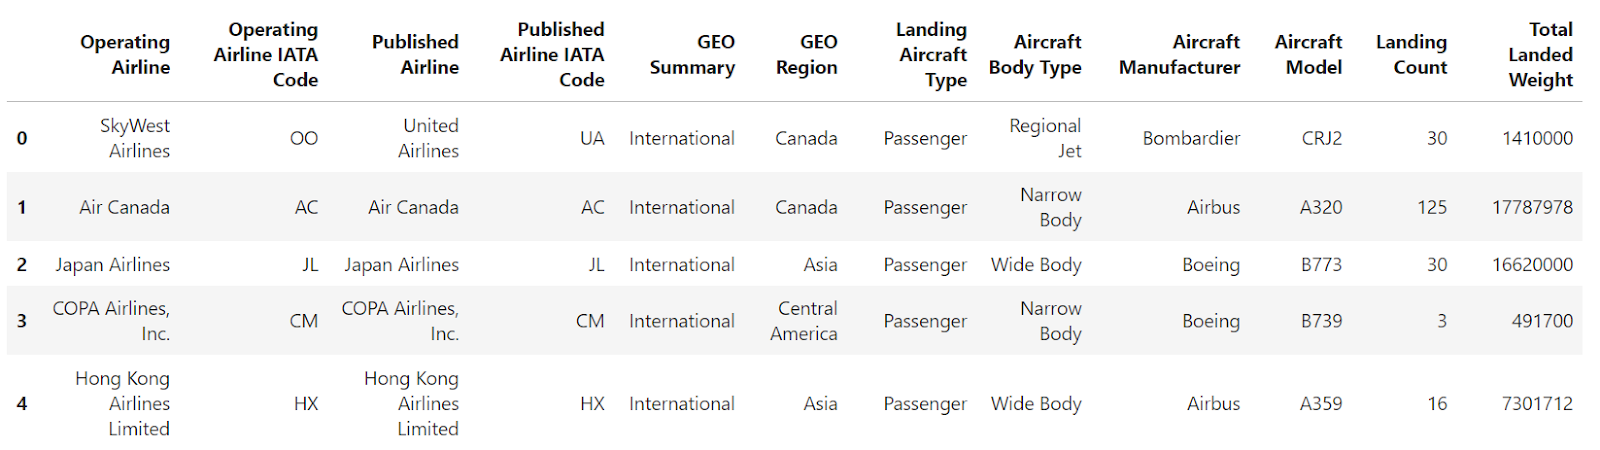 reading airlines dataset